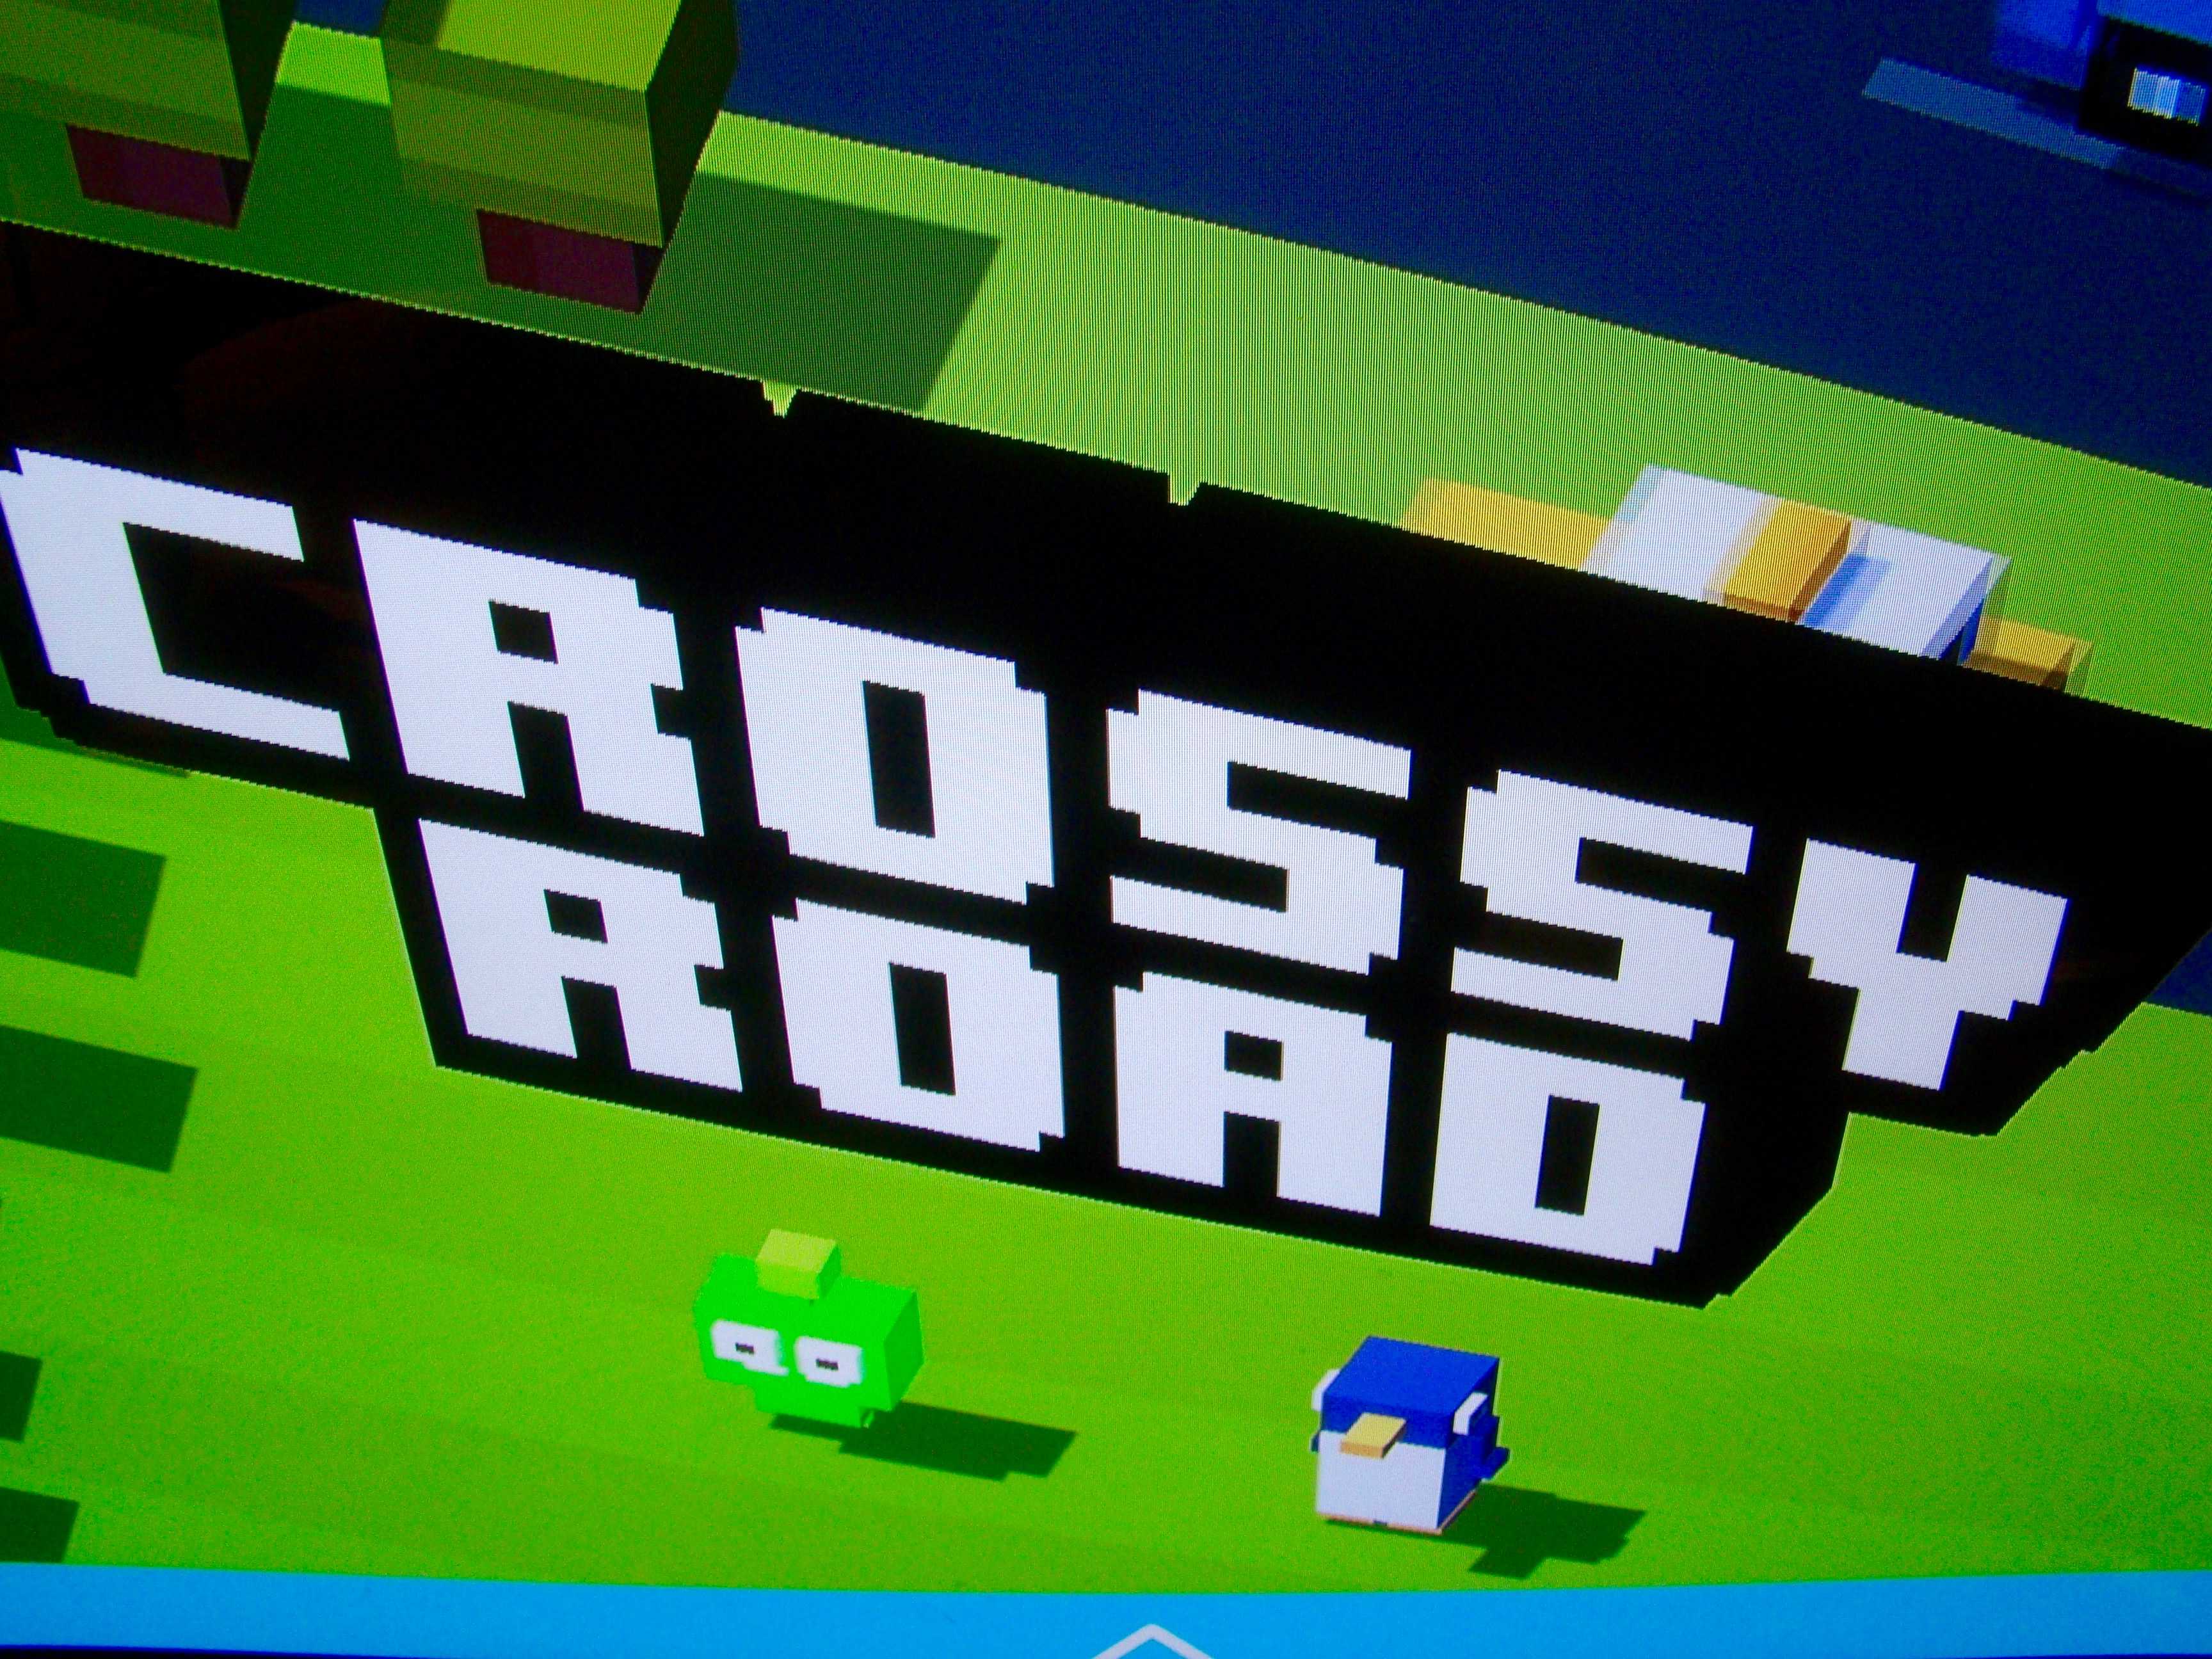 Play Crossy Road with a pal, even without a second controller.